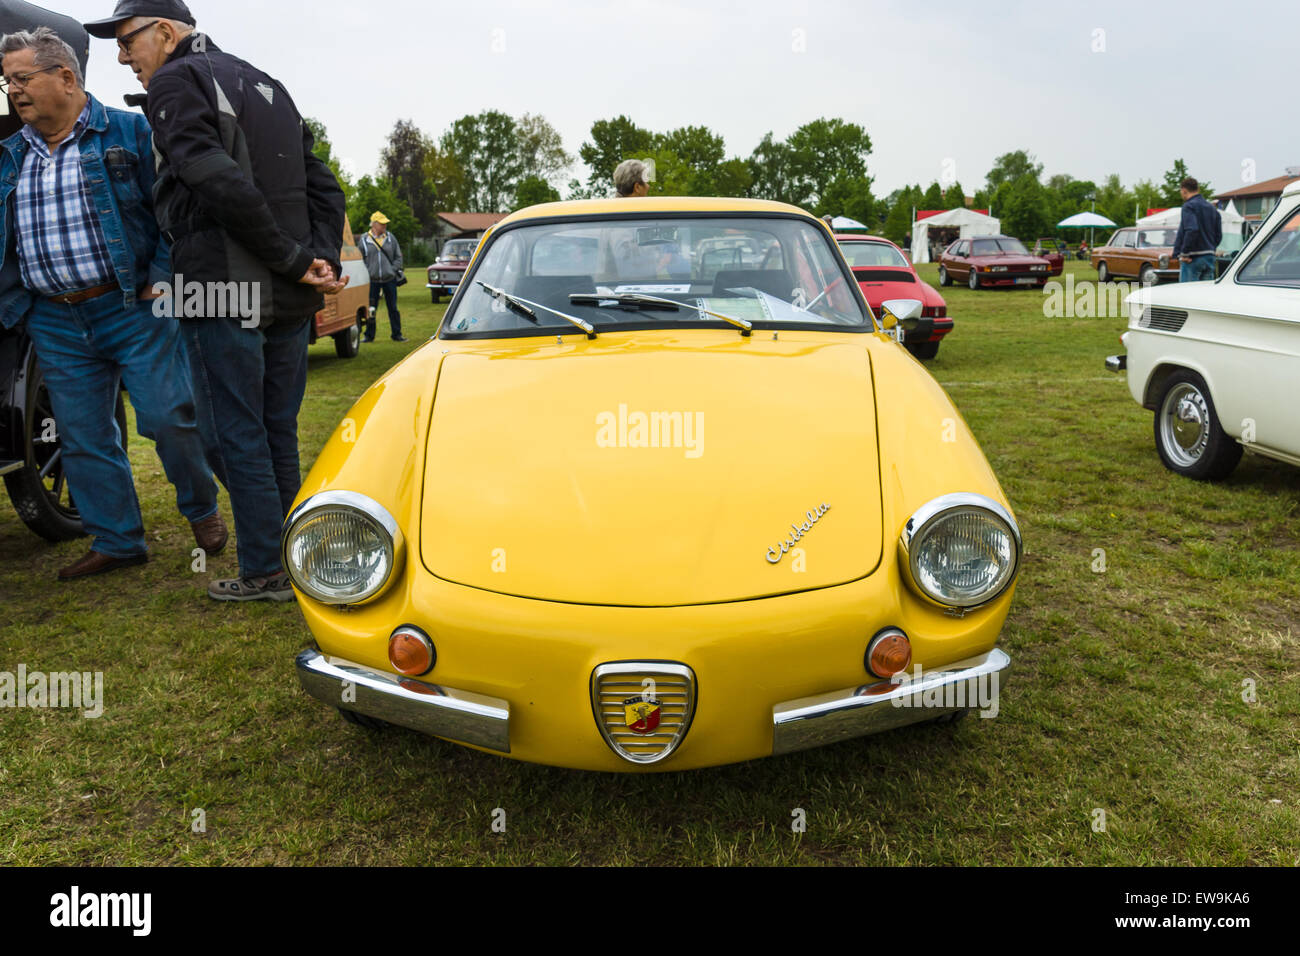 PAAREN IM GLIEN, GERMANY - MAY 23, 2015: Vintage car Cisitalia 850 Coupe Turismo Speciale, 1961. The oldtimer show in MAFZ. Stock Photo